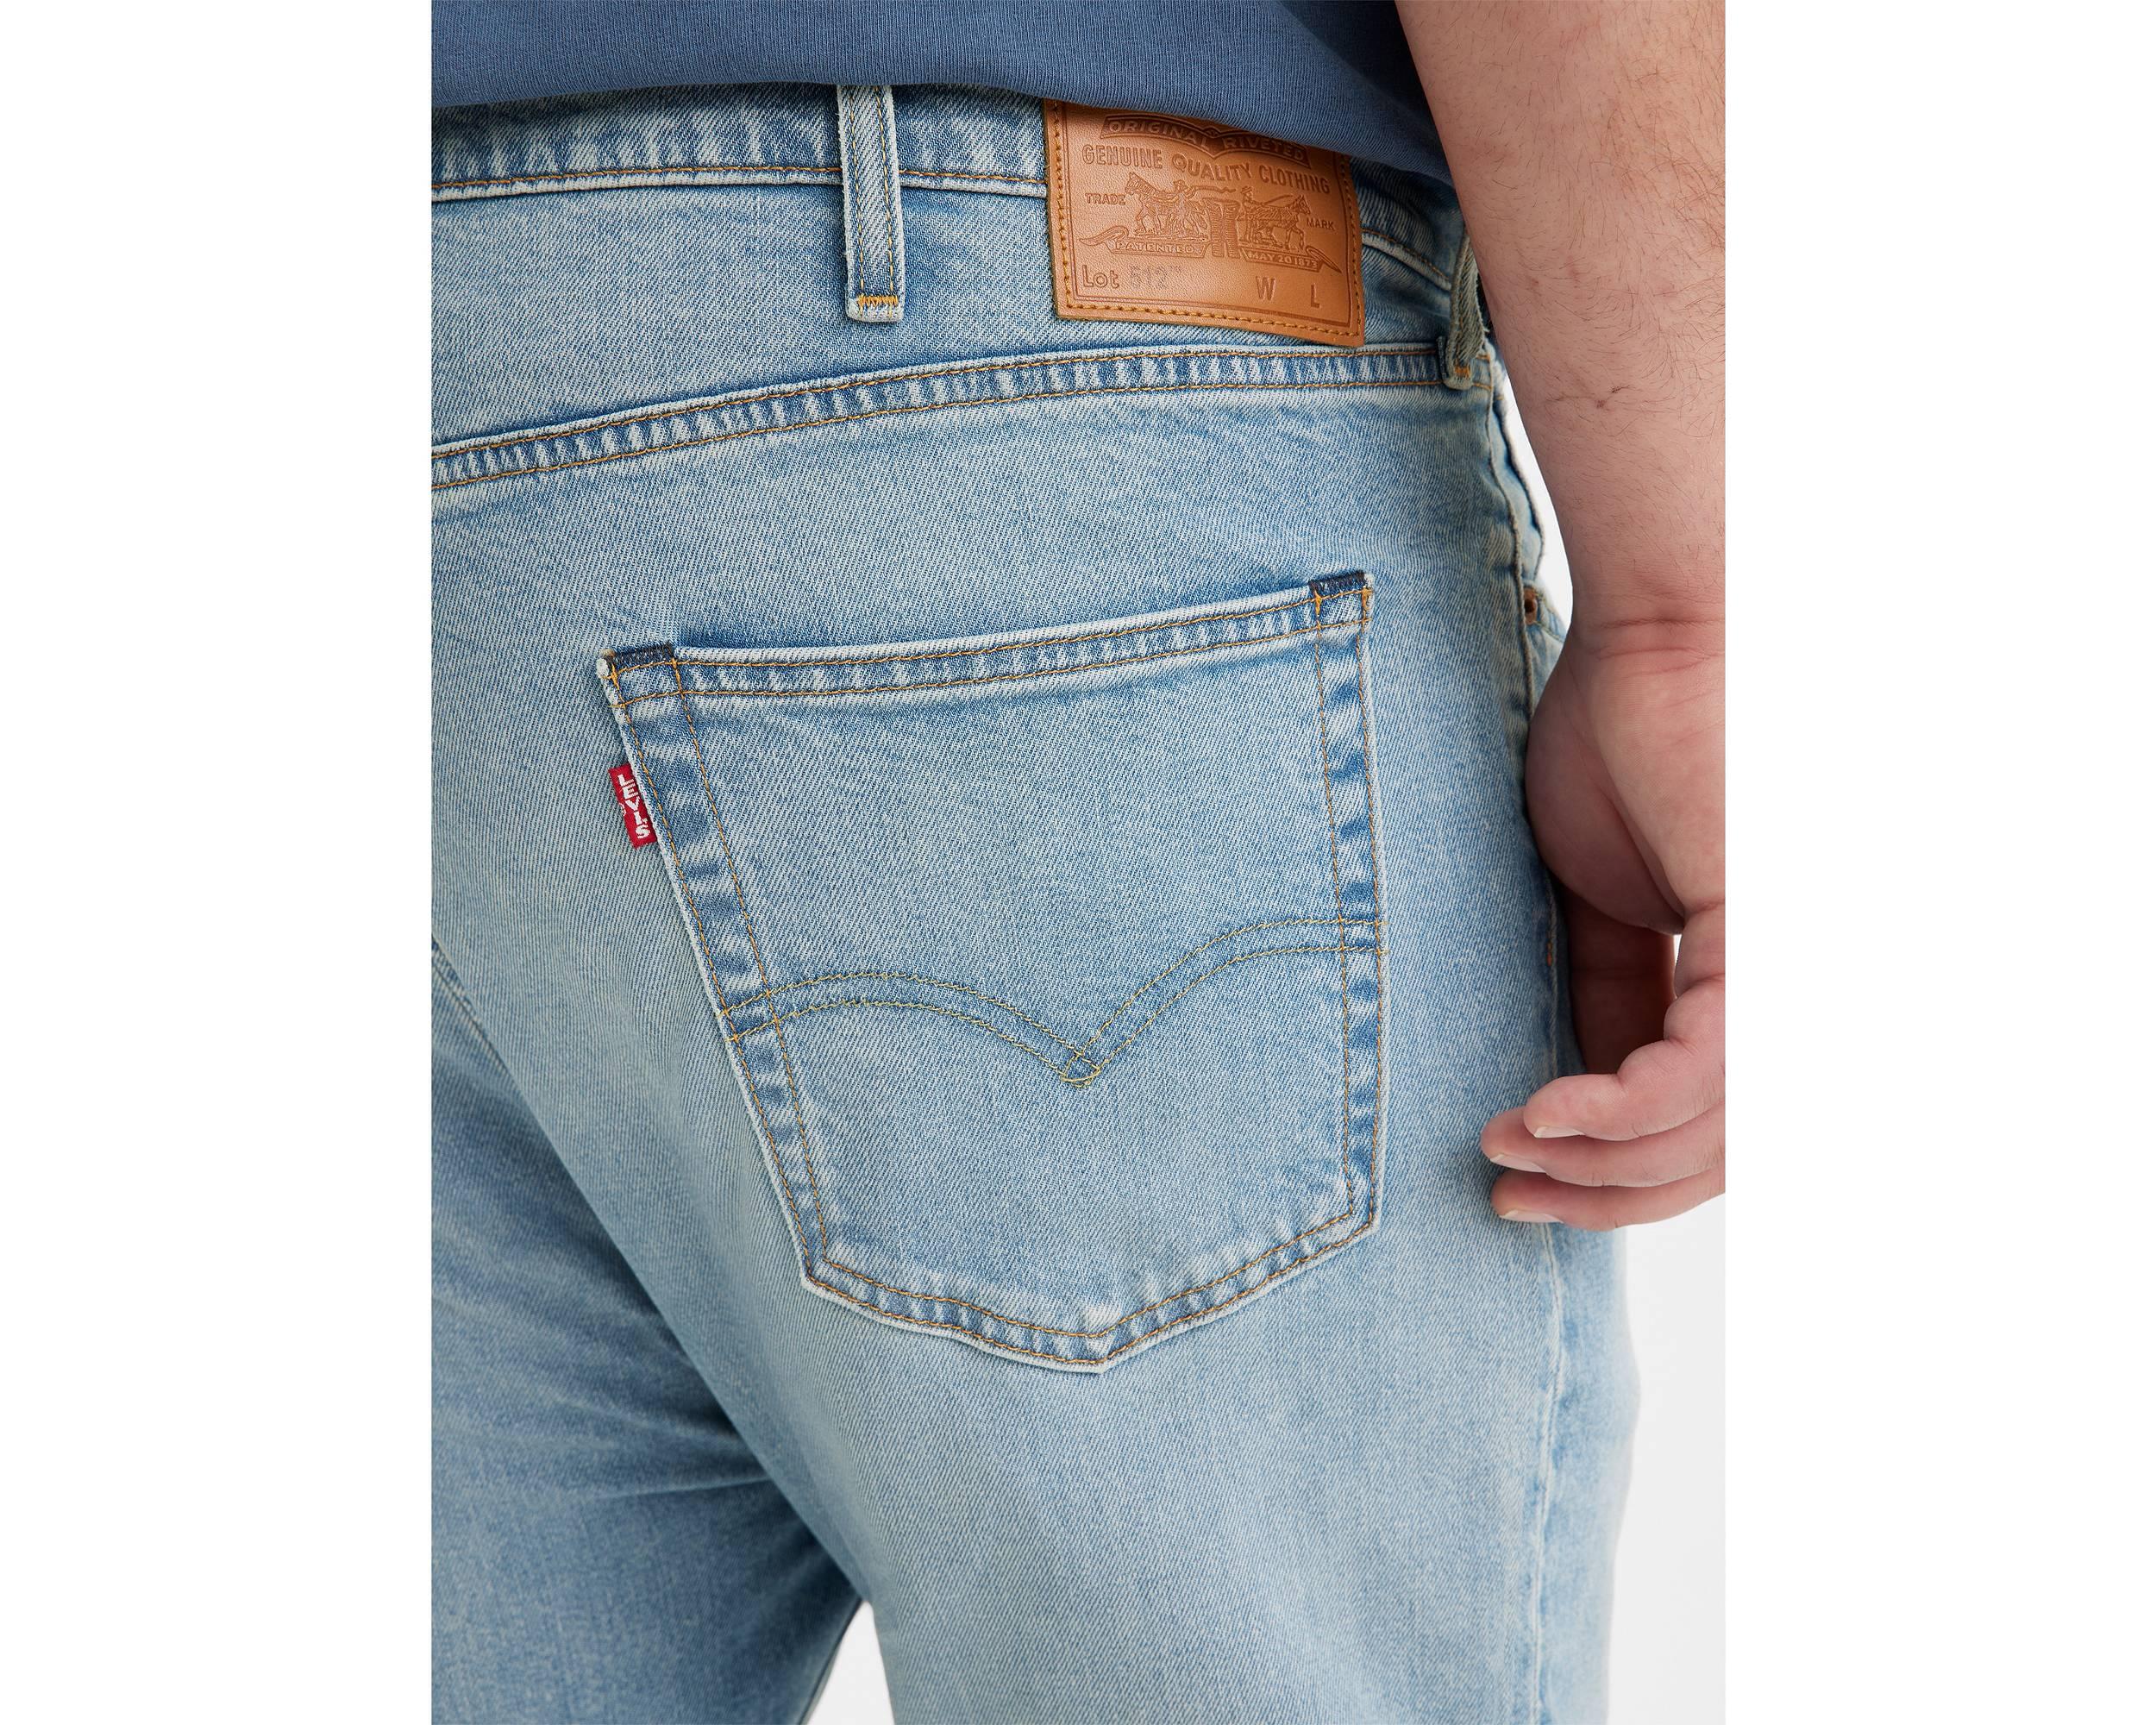 512™ Slim Tapered Jeans (Big & Tall) - Levi's Jeans, Jackets & Clothing